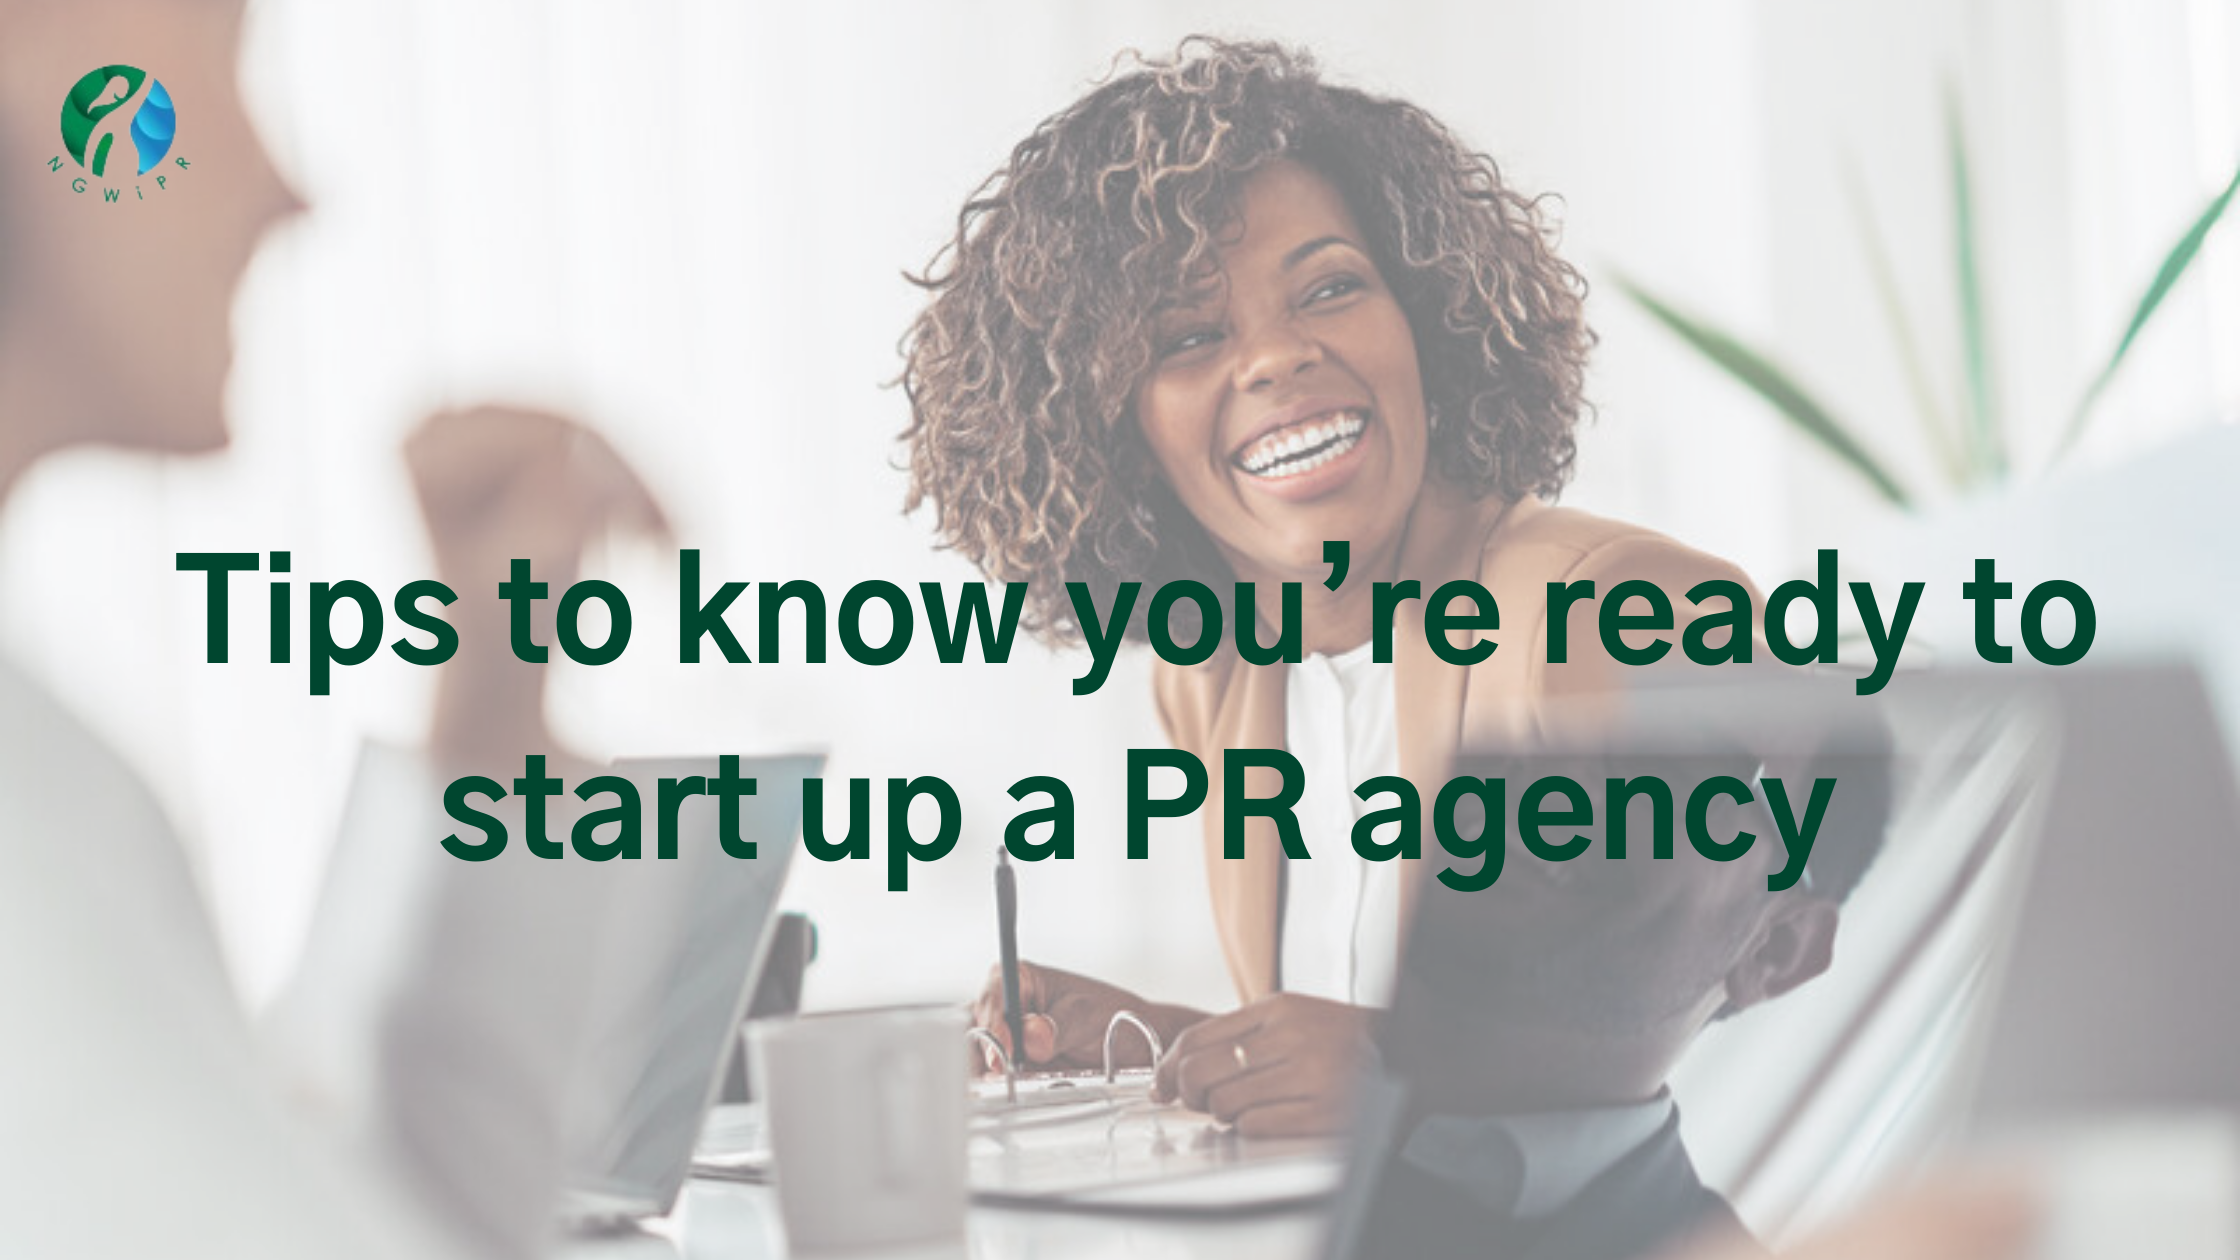 Tips to know you’re ready to start up a PR agency